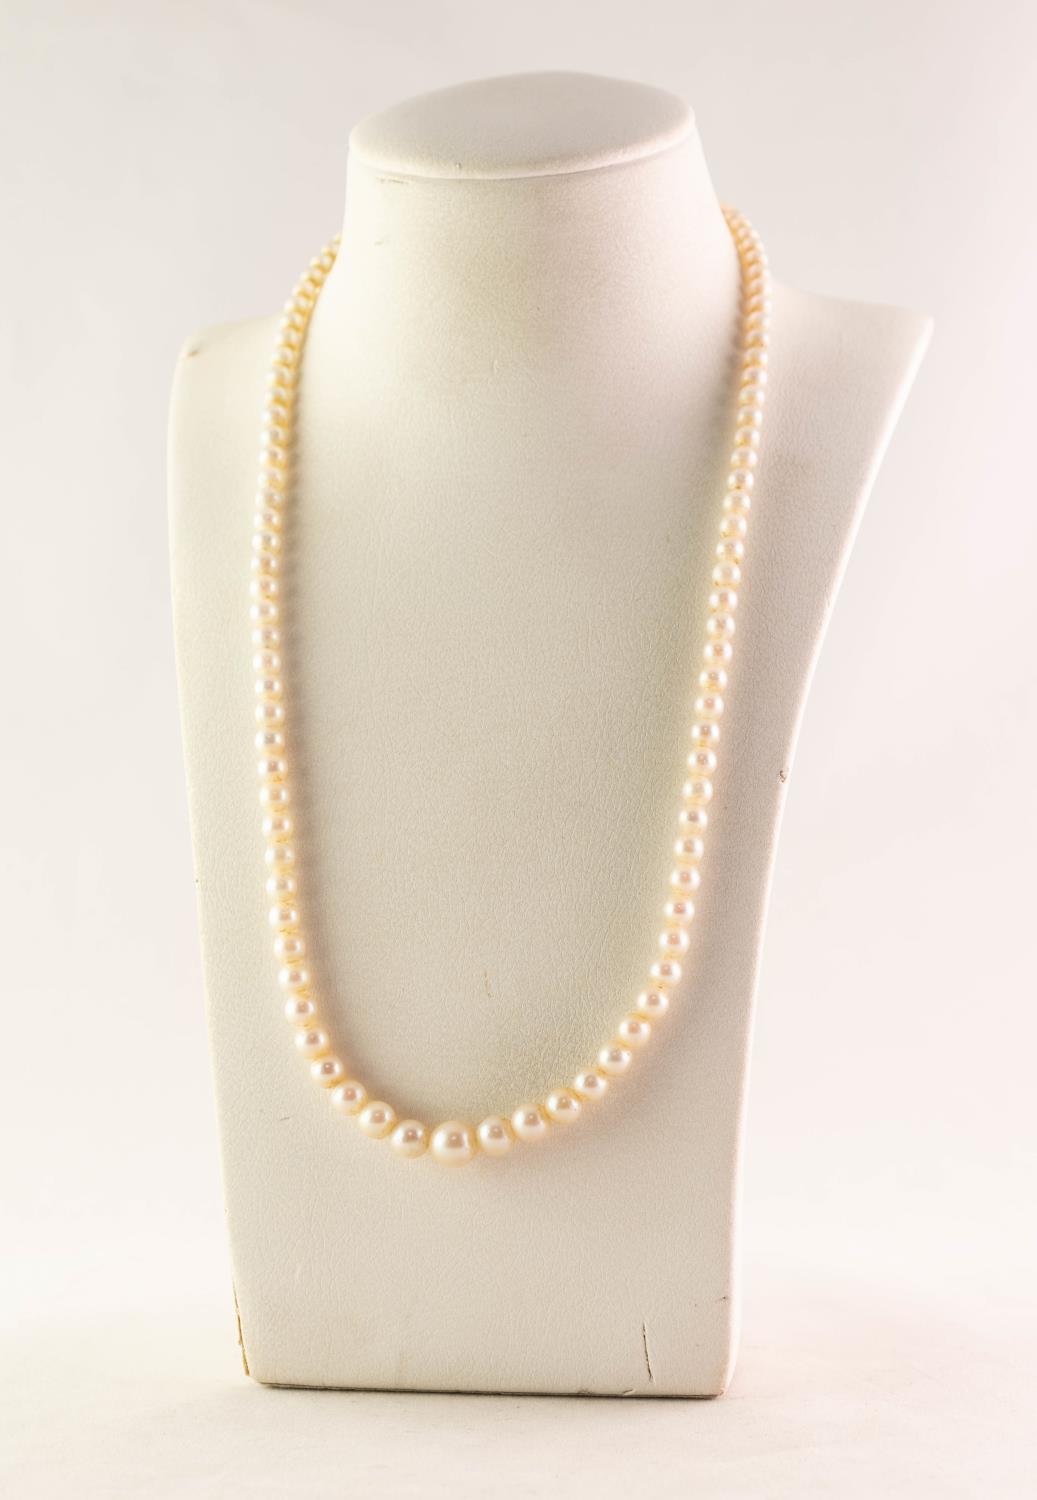 SINGLE STRAND NECKLACE OF GRADUATED CULTURED PEARLS with sterling silver, marcasite and seed pearl